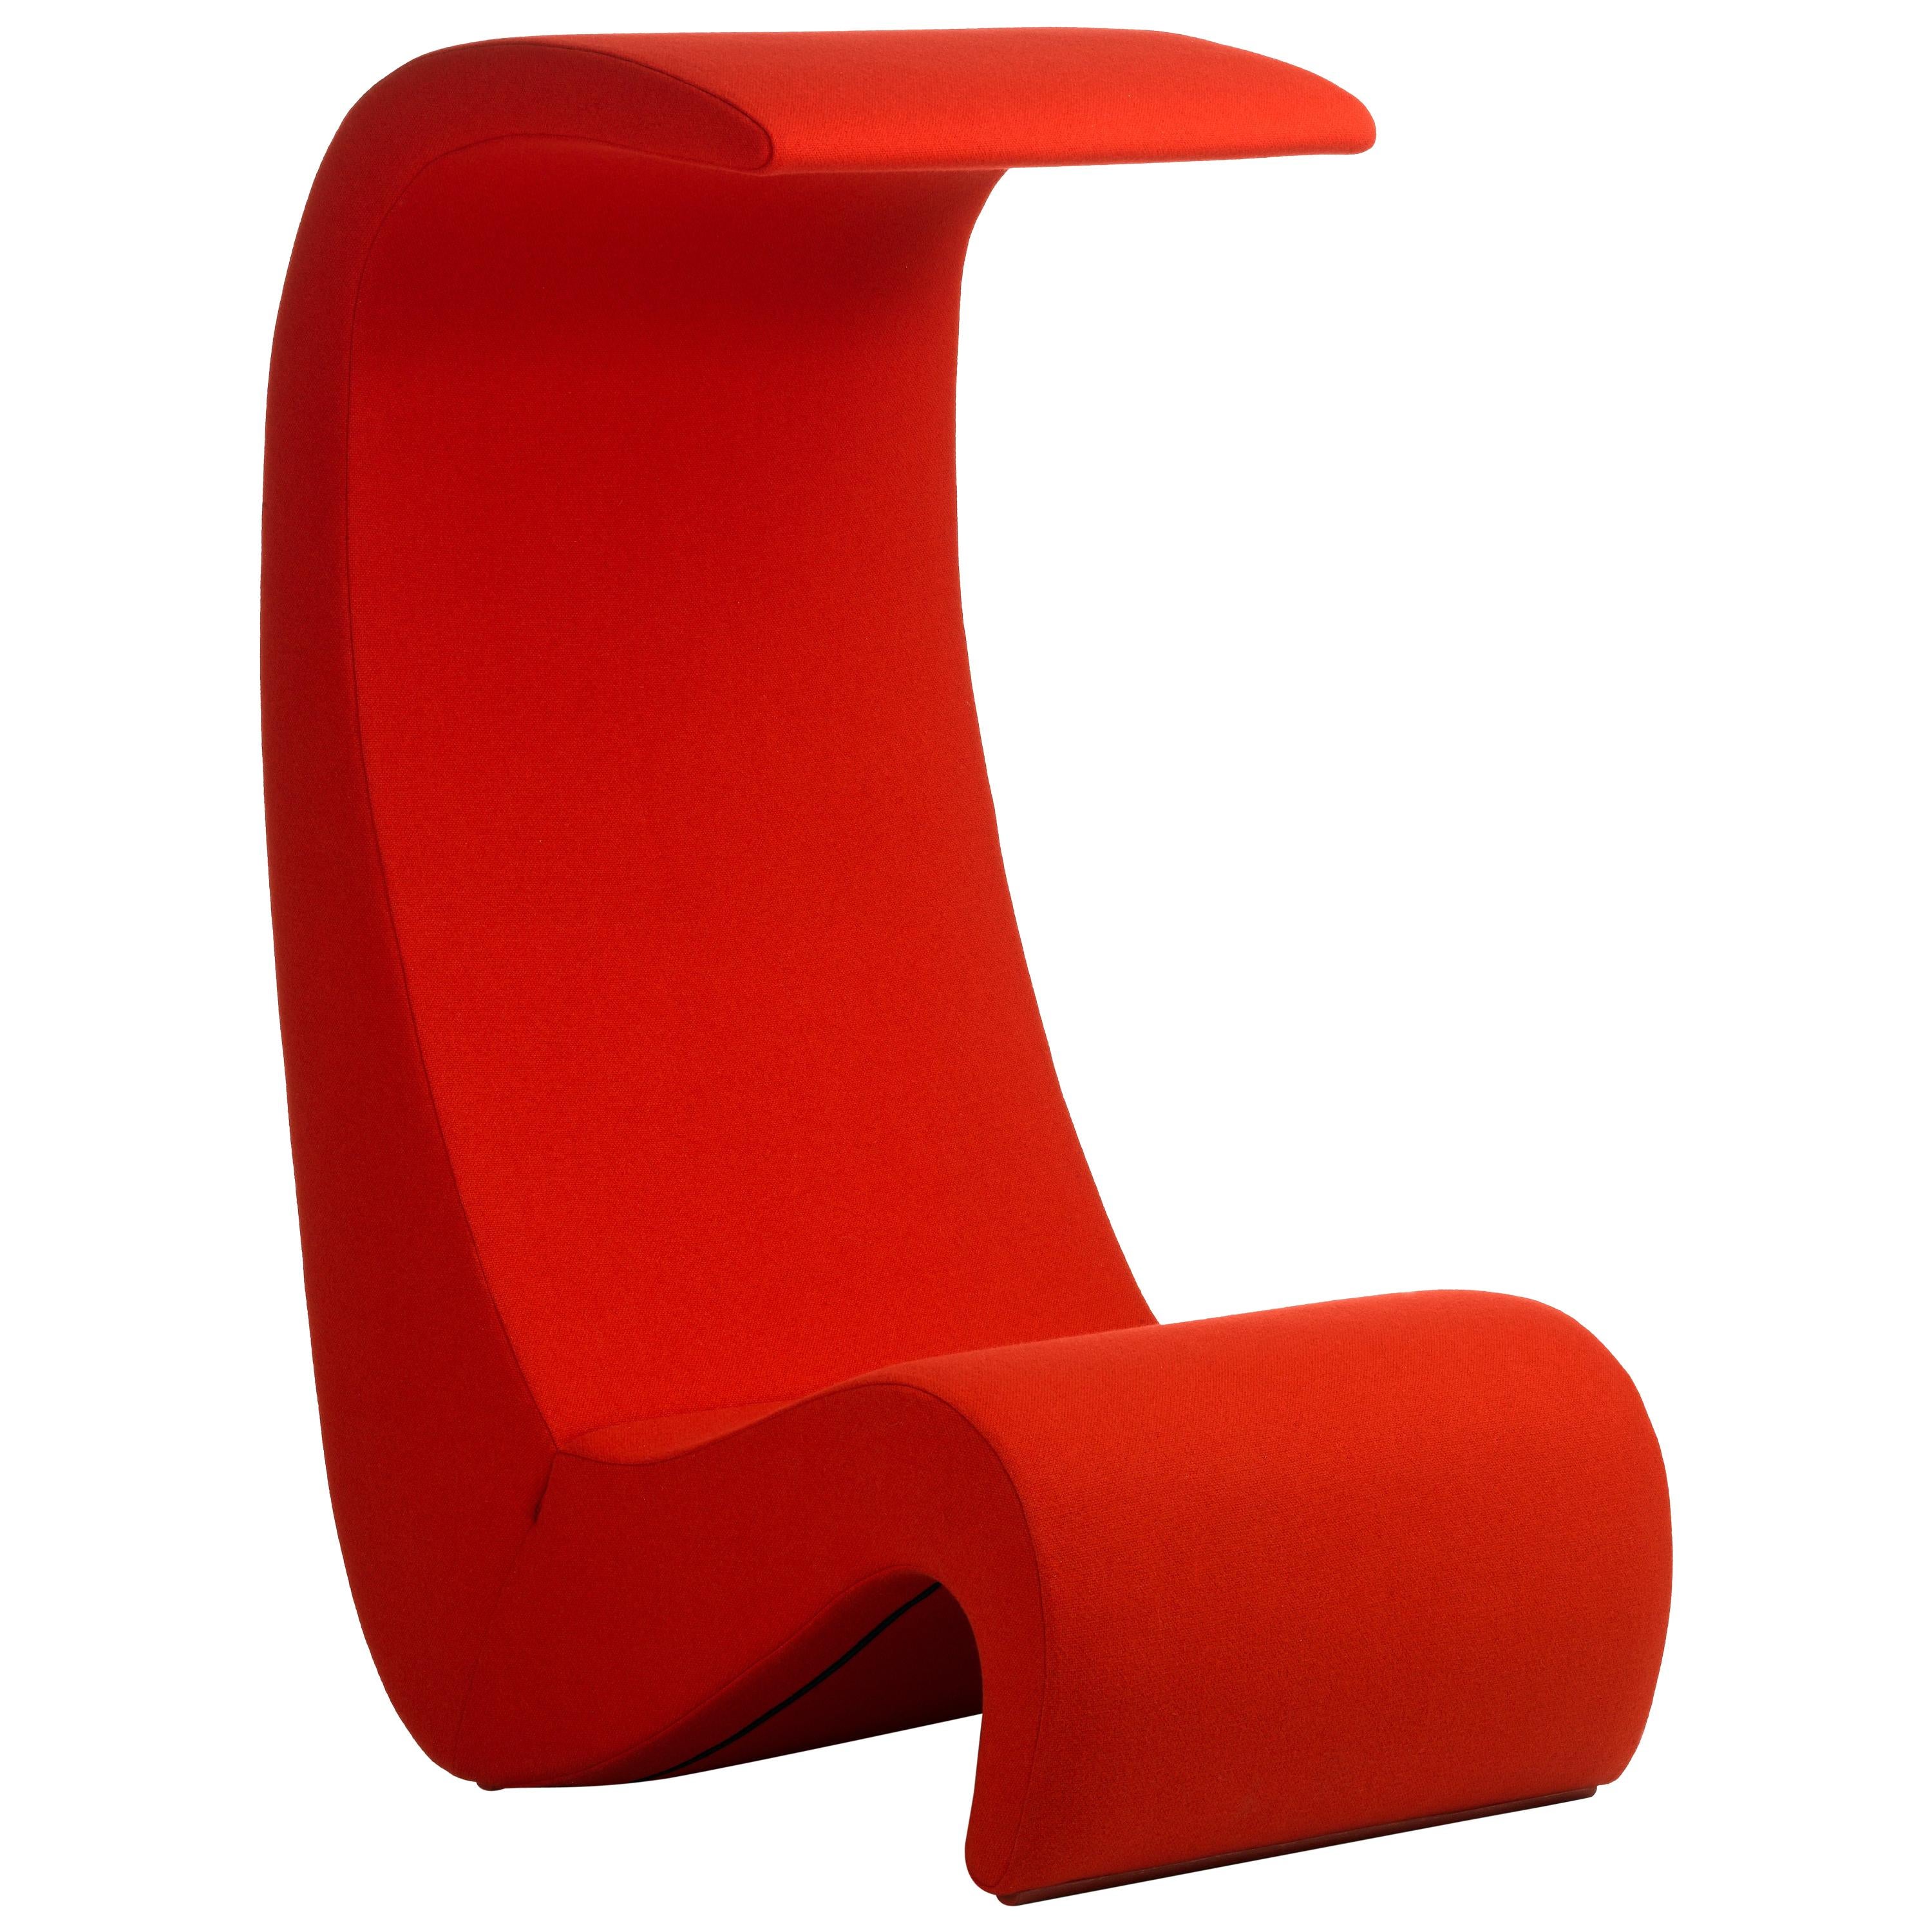 Vitra Amoebe High Back Chair in Red by Verner Panton im Angebot